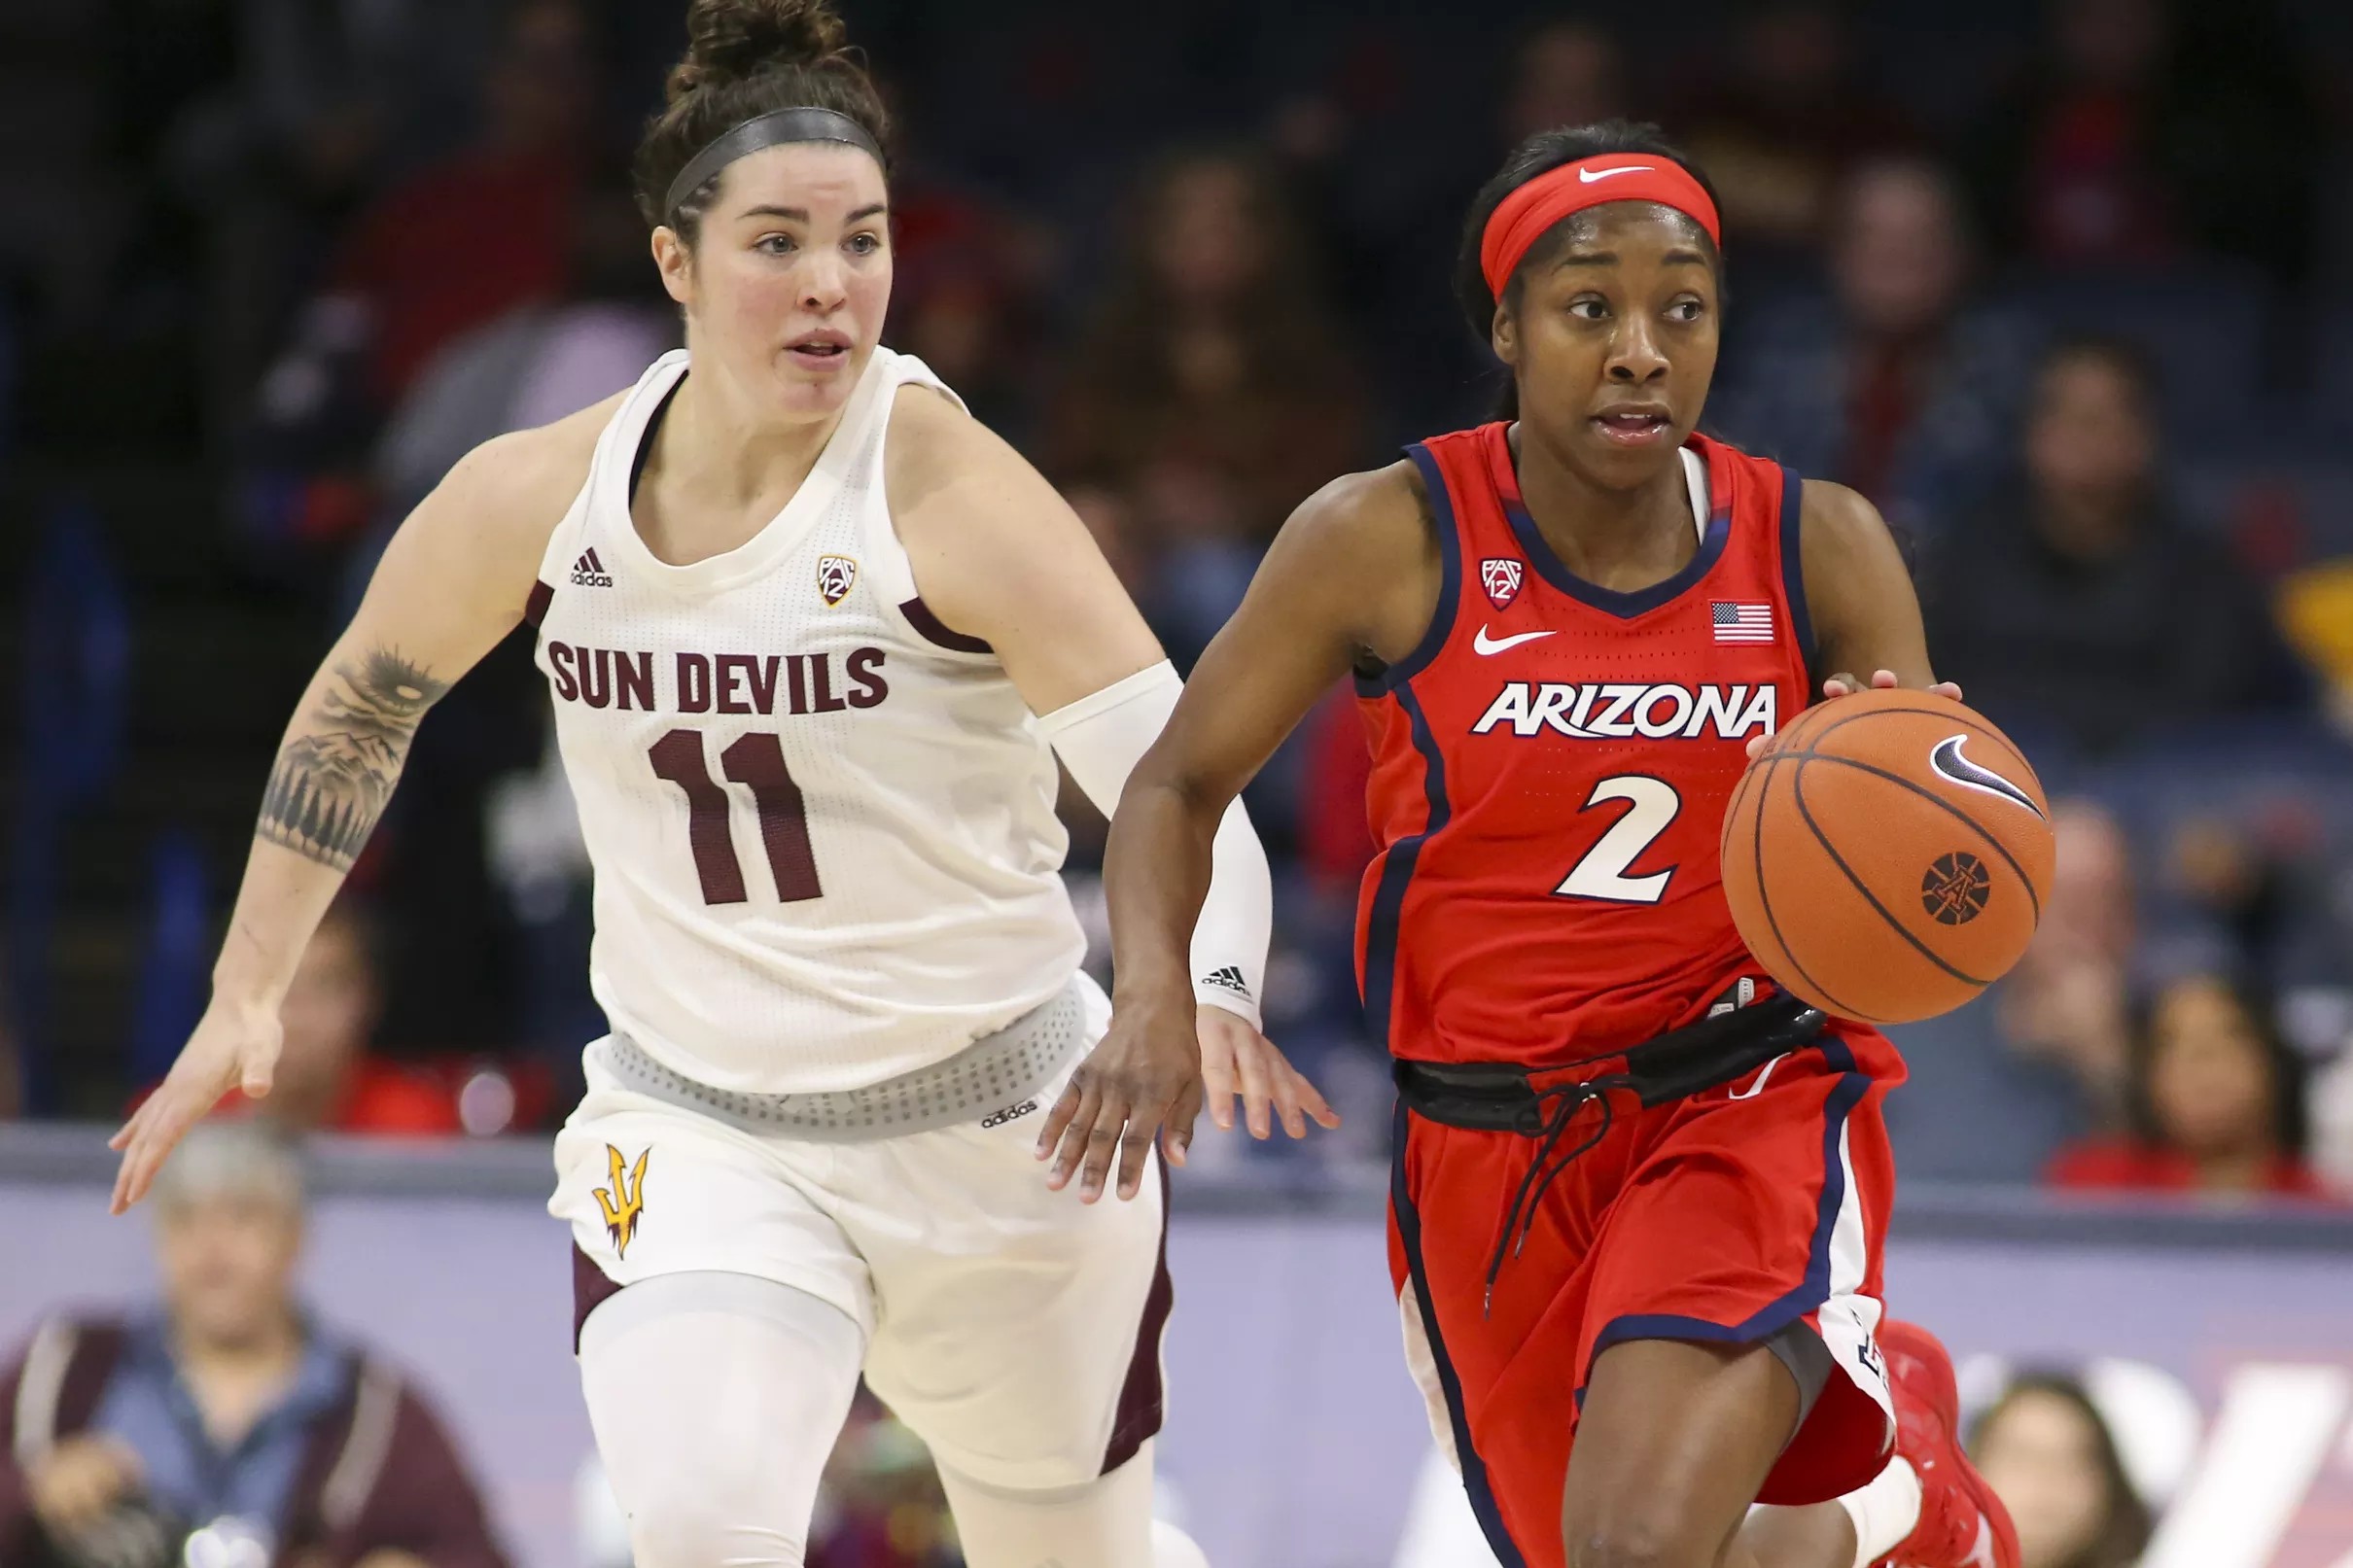 Arizona women’s basketball’s Pac12 schedule is out, but nonconference